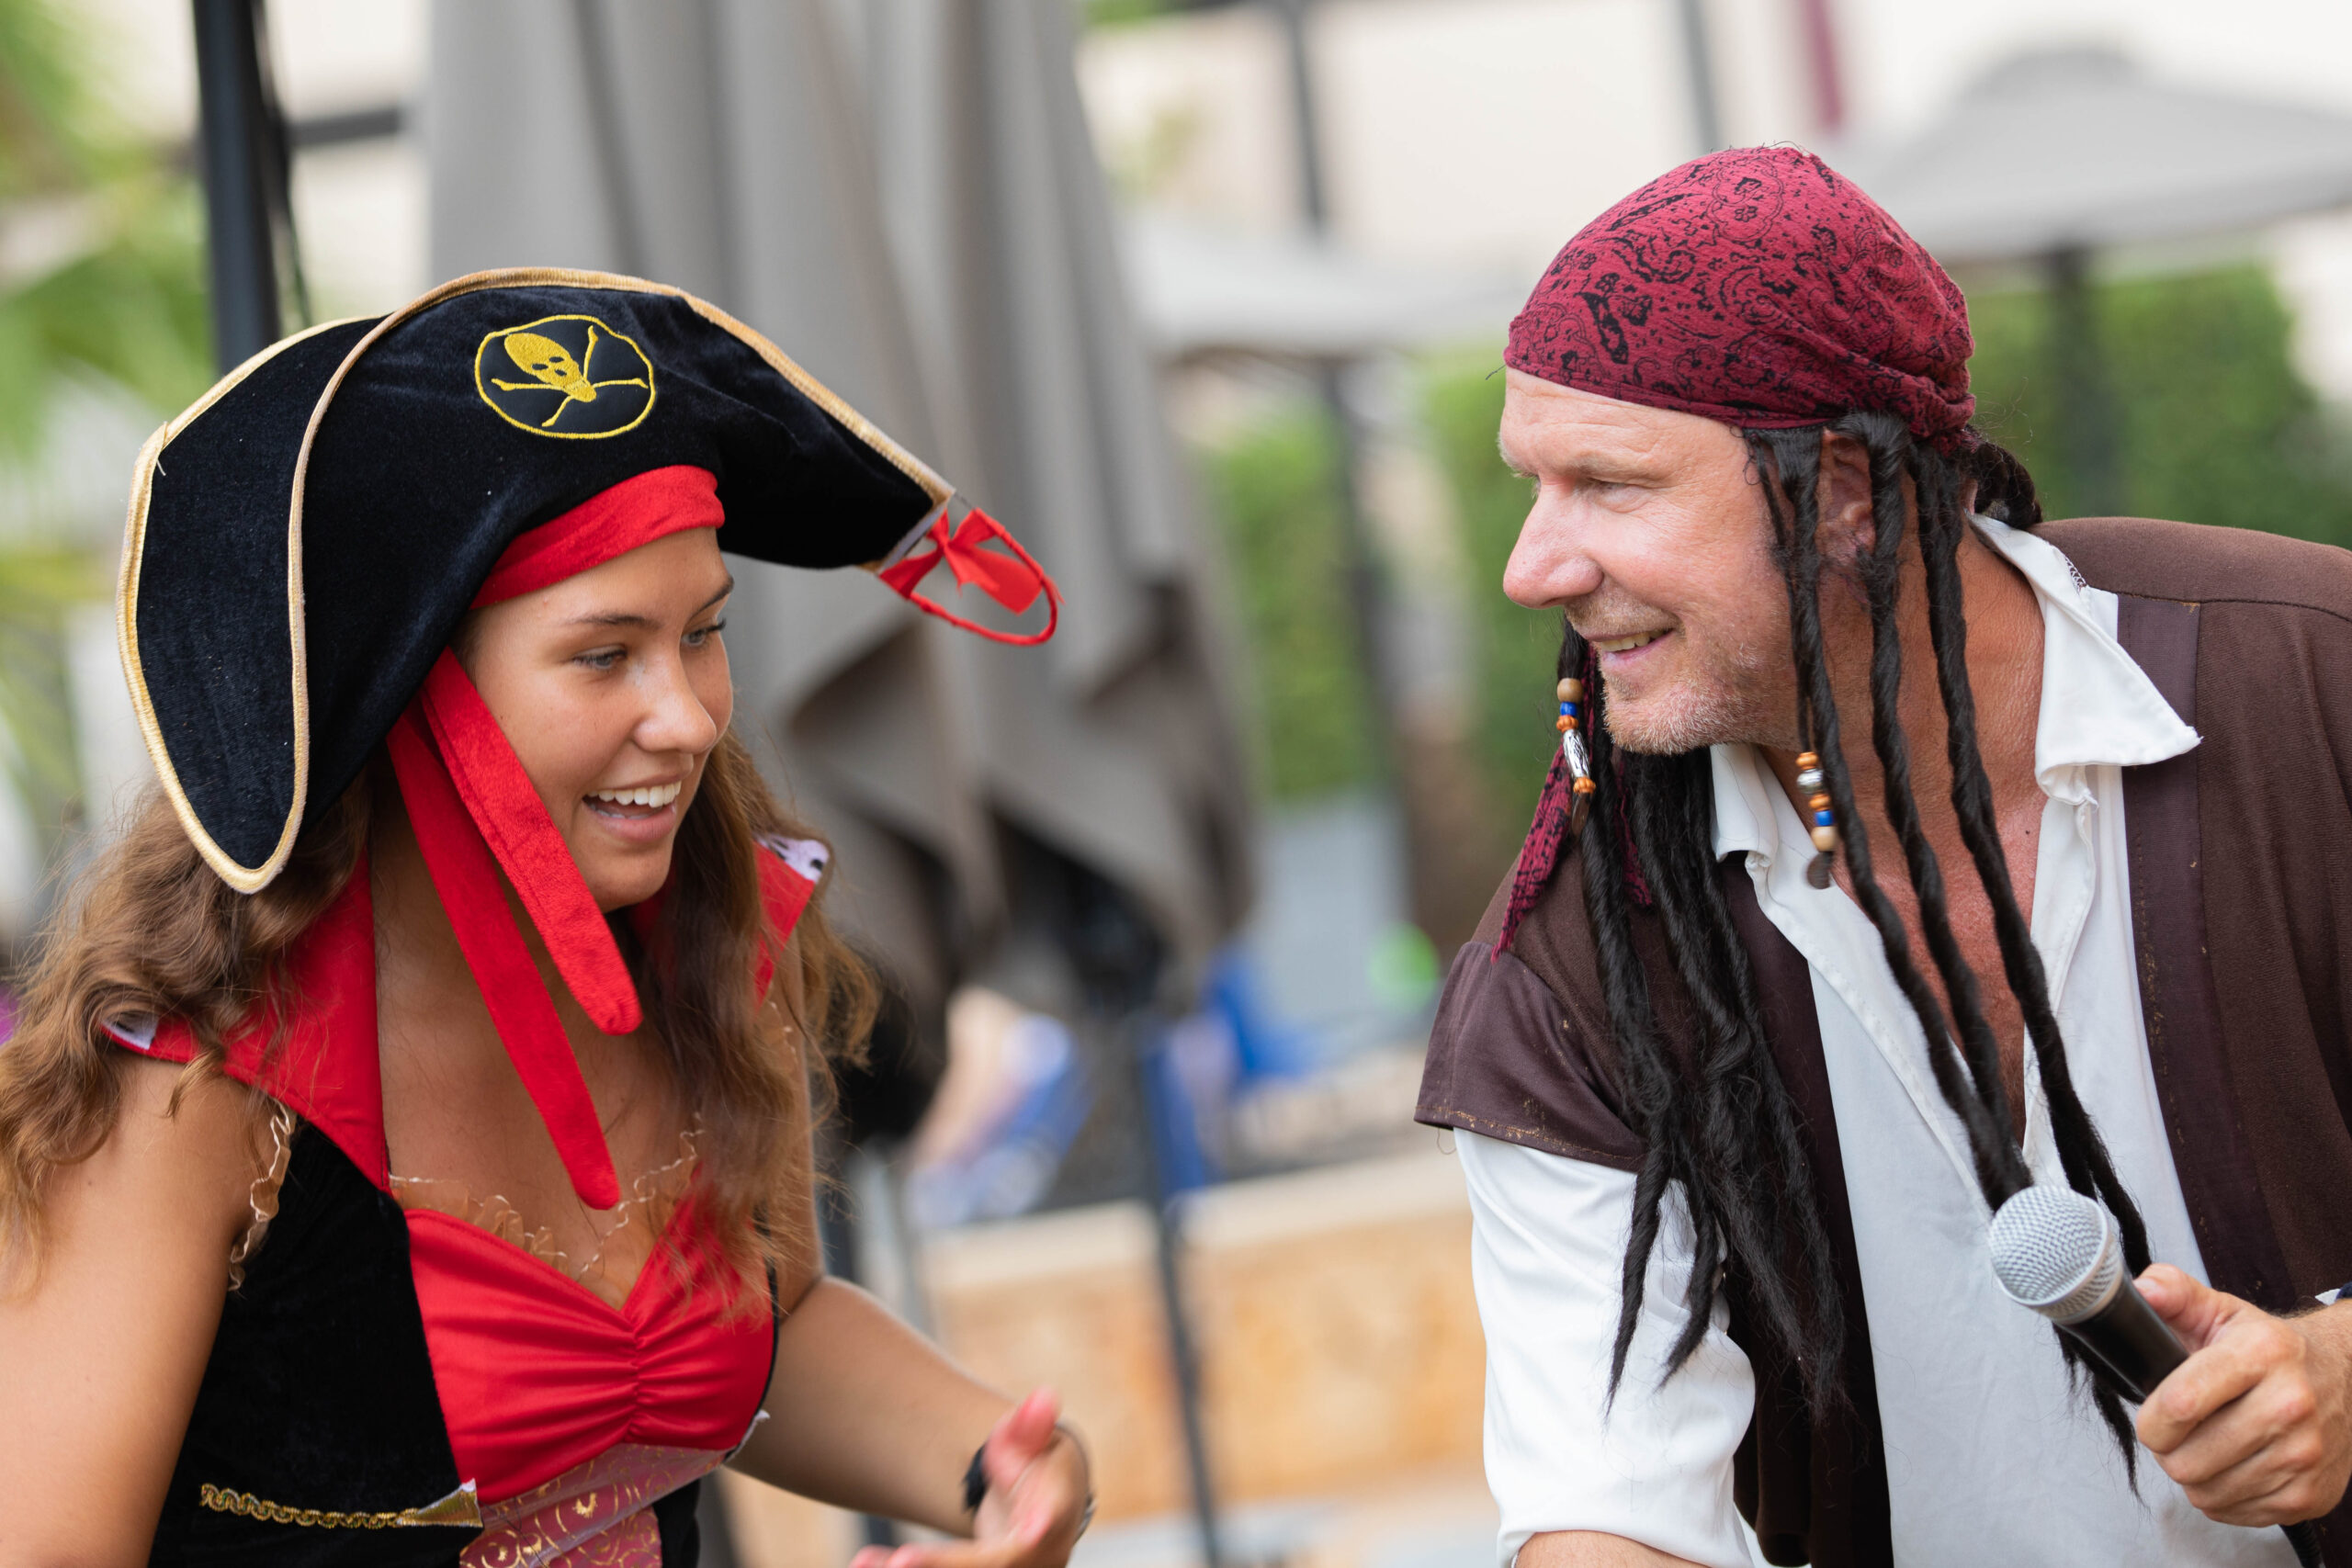 Two TUI entertainers dressed as pirates laughing and happy.